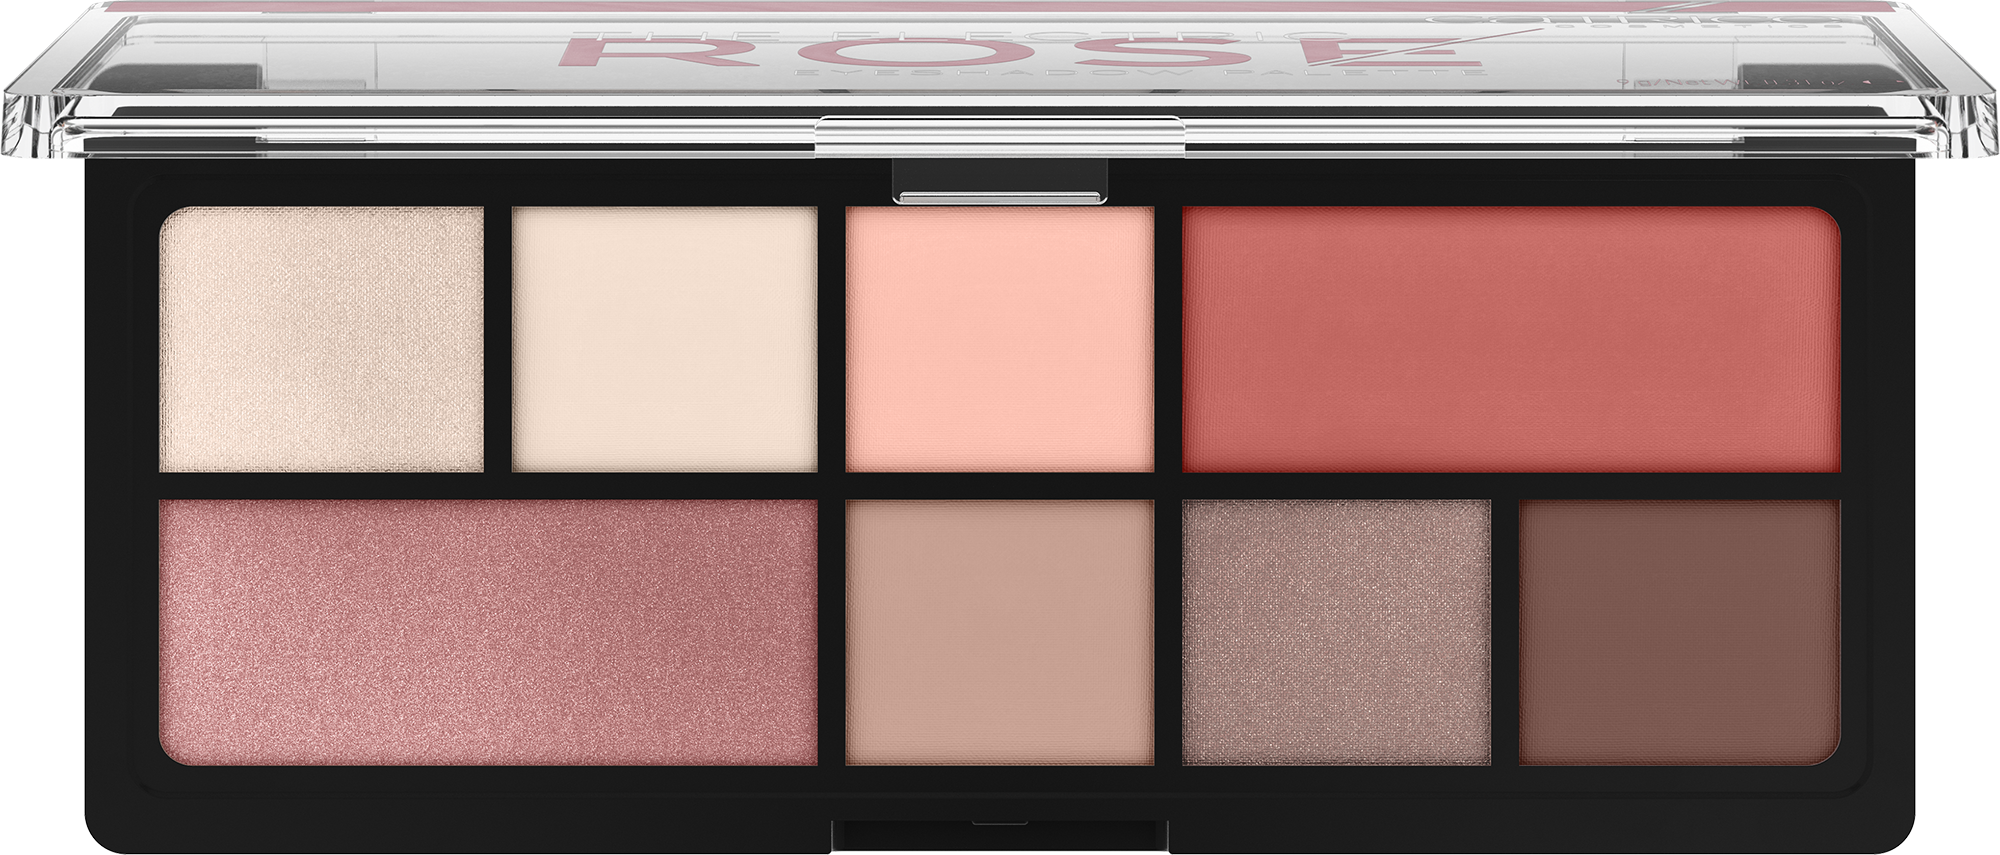 The Electric Rose Eyeshadow Palette